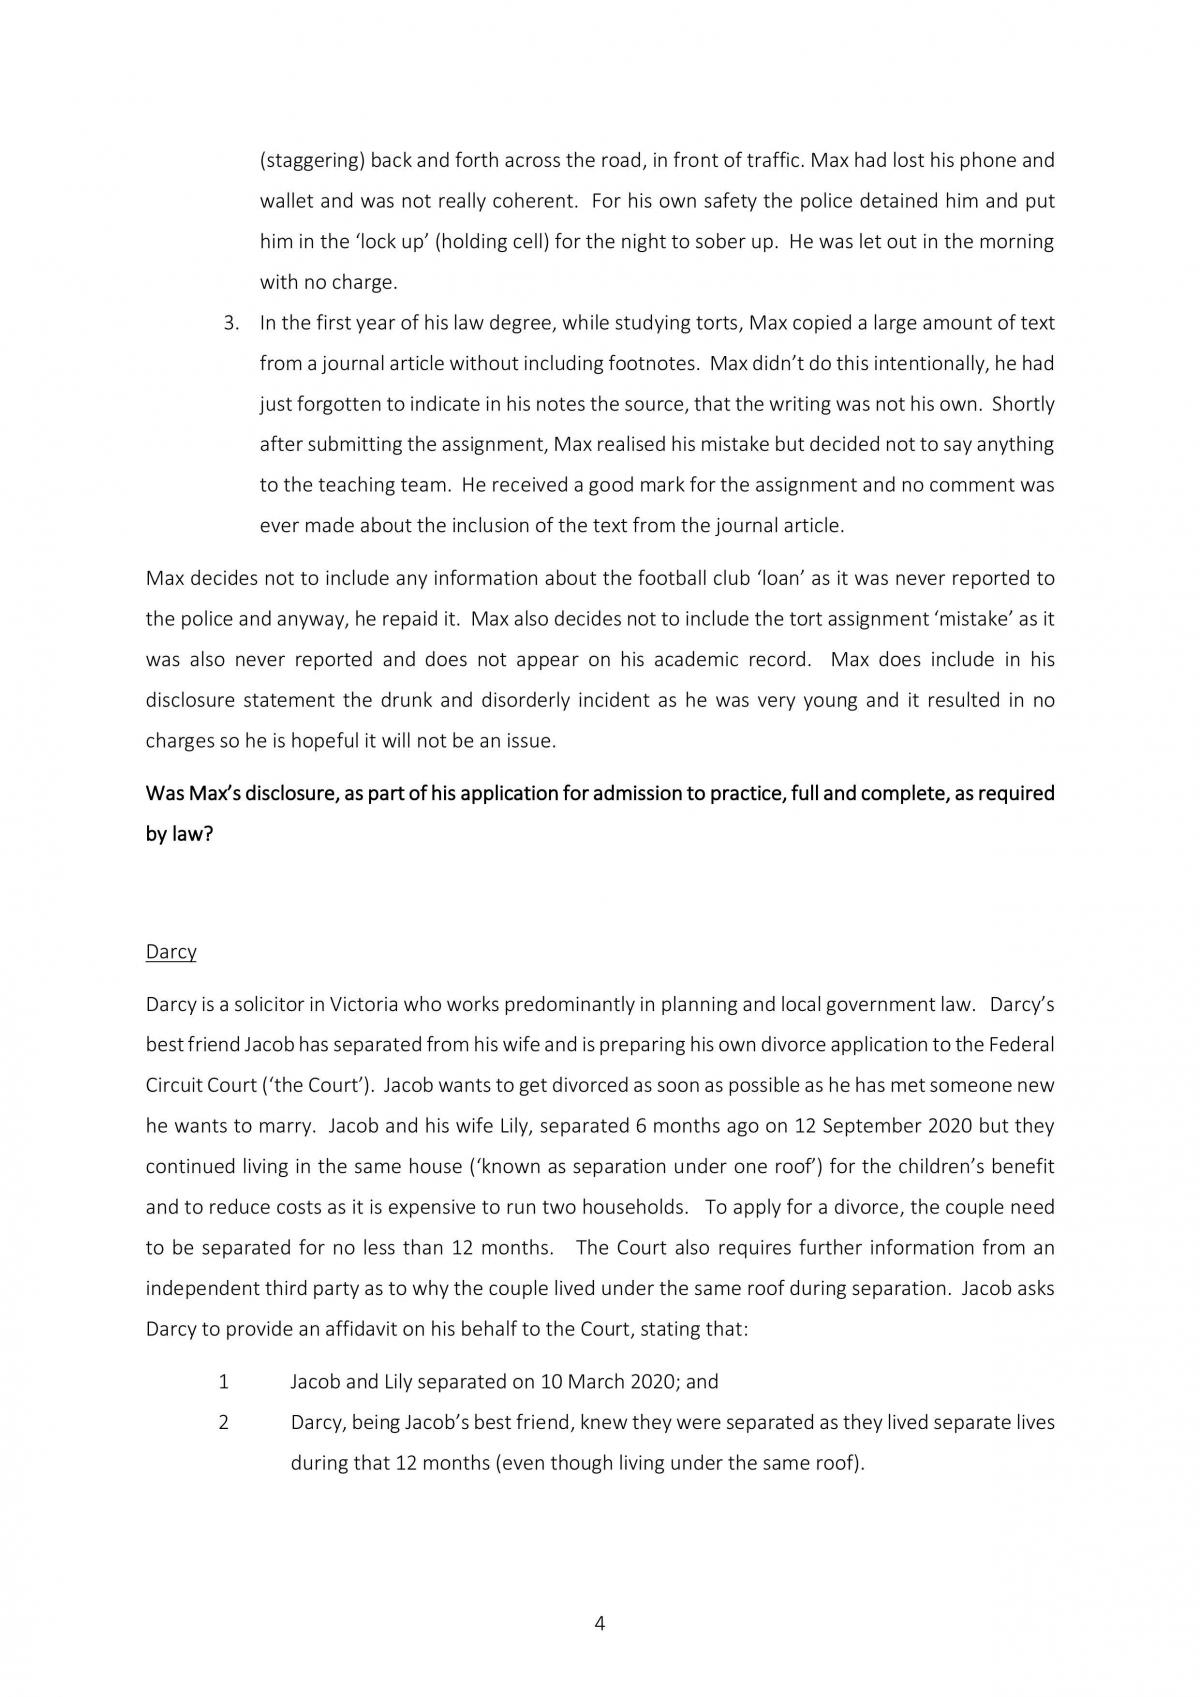 Legal Communication and Ethical Decision Making - Page 4